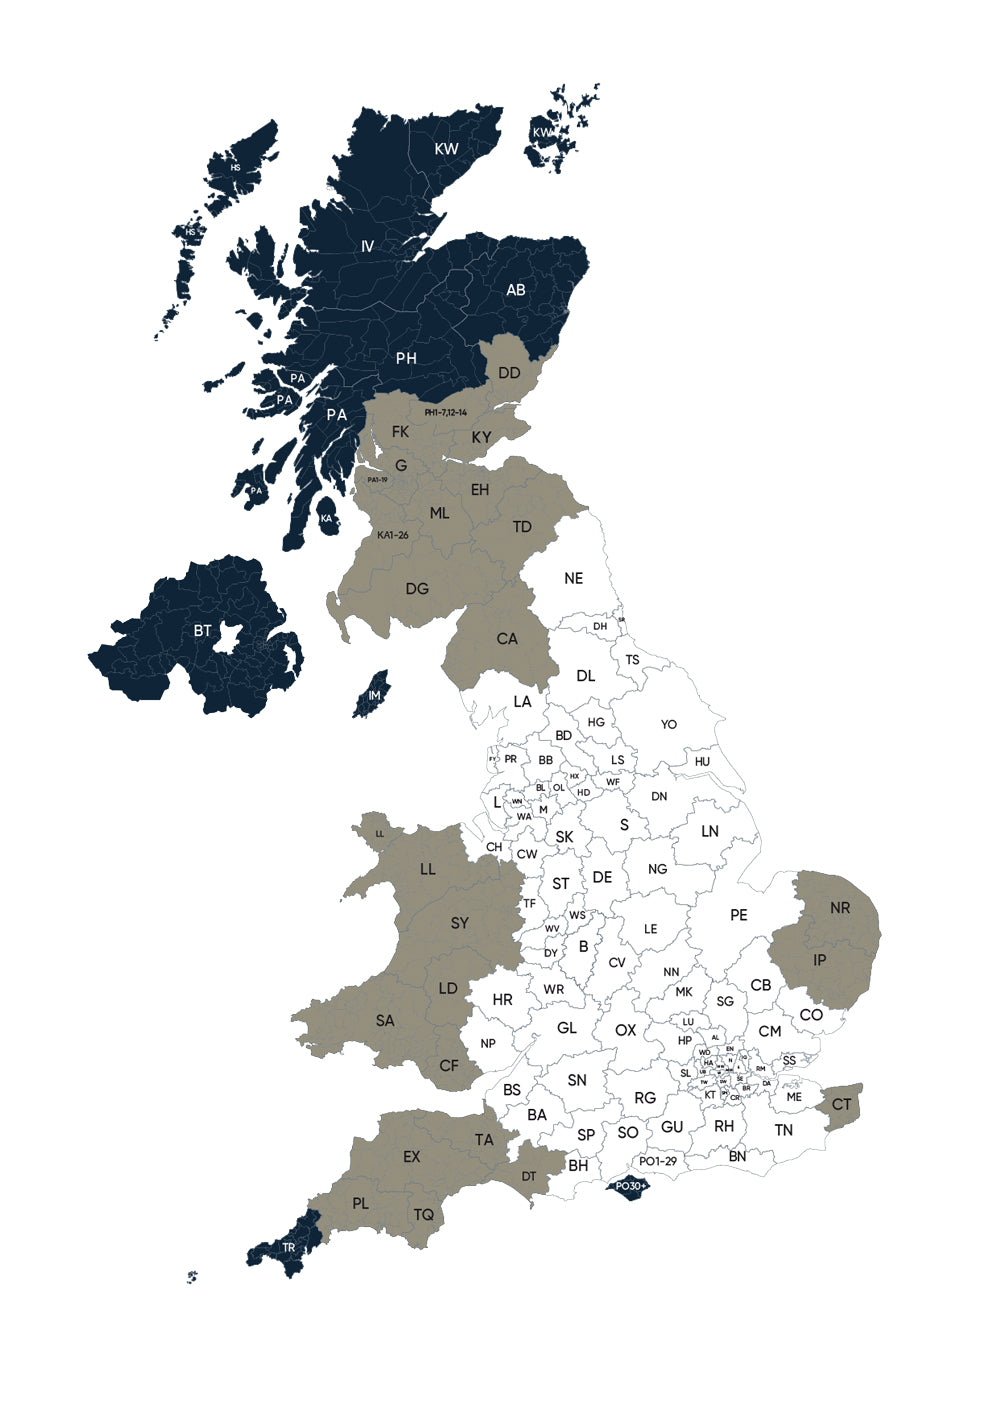 Map of the UK sectioned for install postcodes 